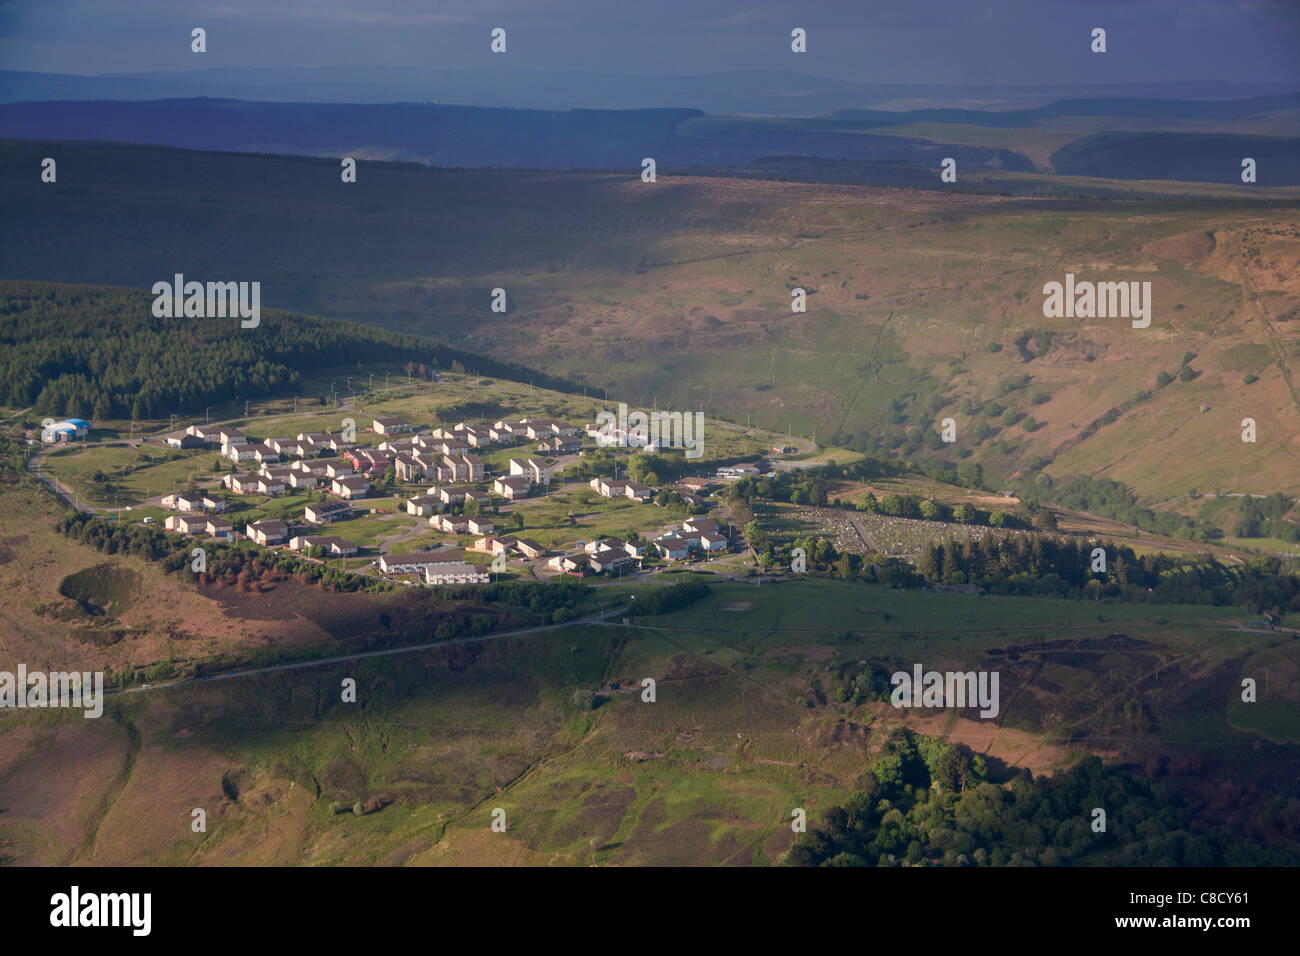 Penrhys council housing estate and cemetery on hilltop above Rhondda Valleys in dramatic evening light Valleys South Wales UK Stock Photo